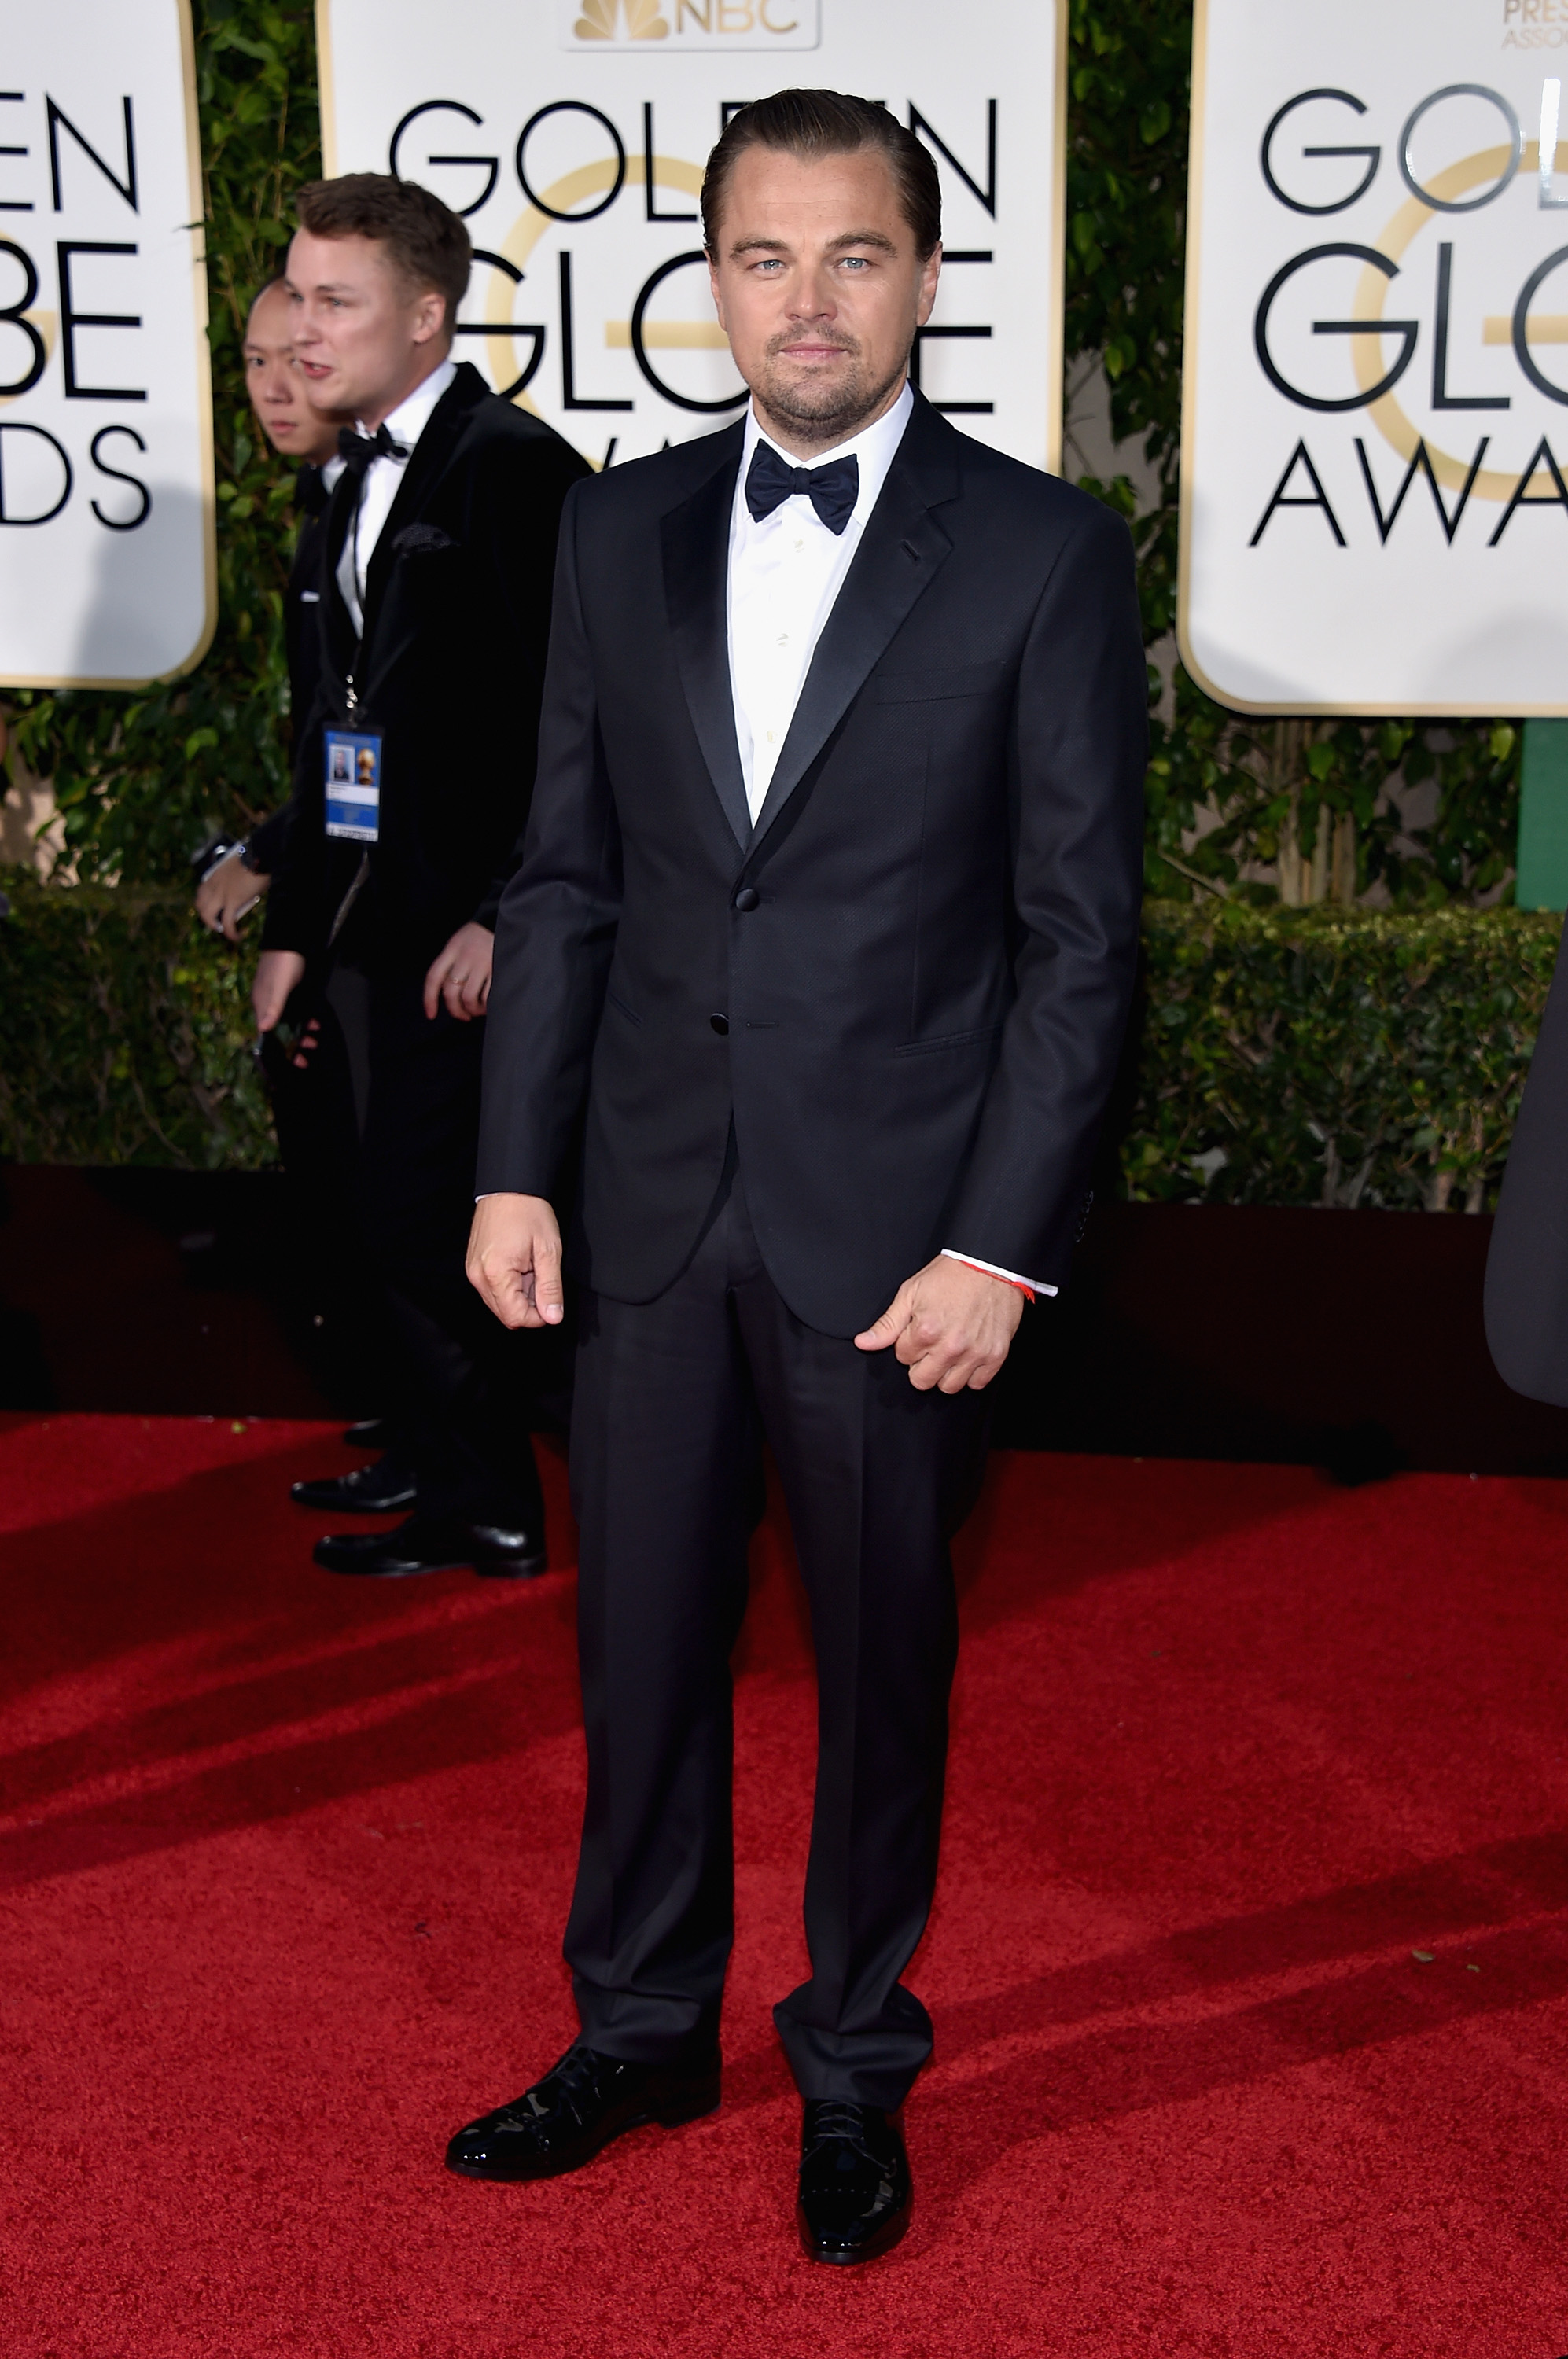 Leonardo DiCaprio arrives to the 73rd Annual Golden Globe Awards on Jan. 10, 2016 in Beverly Hills.